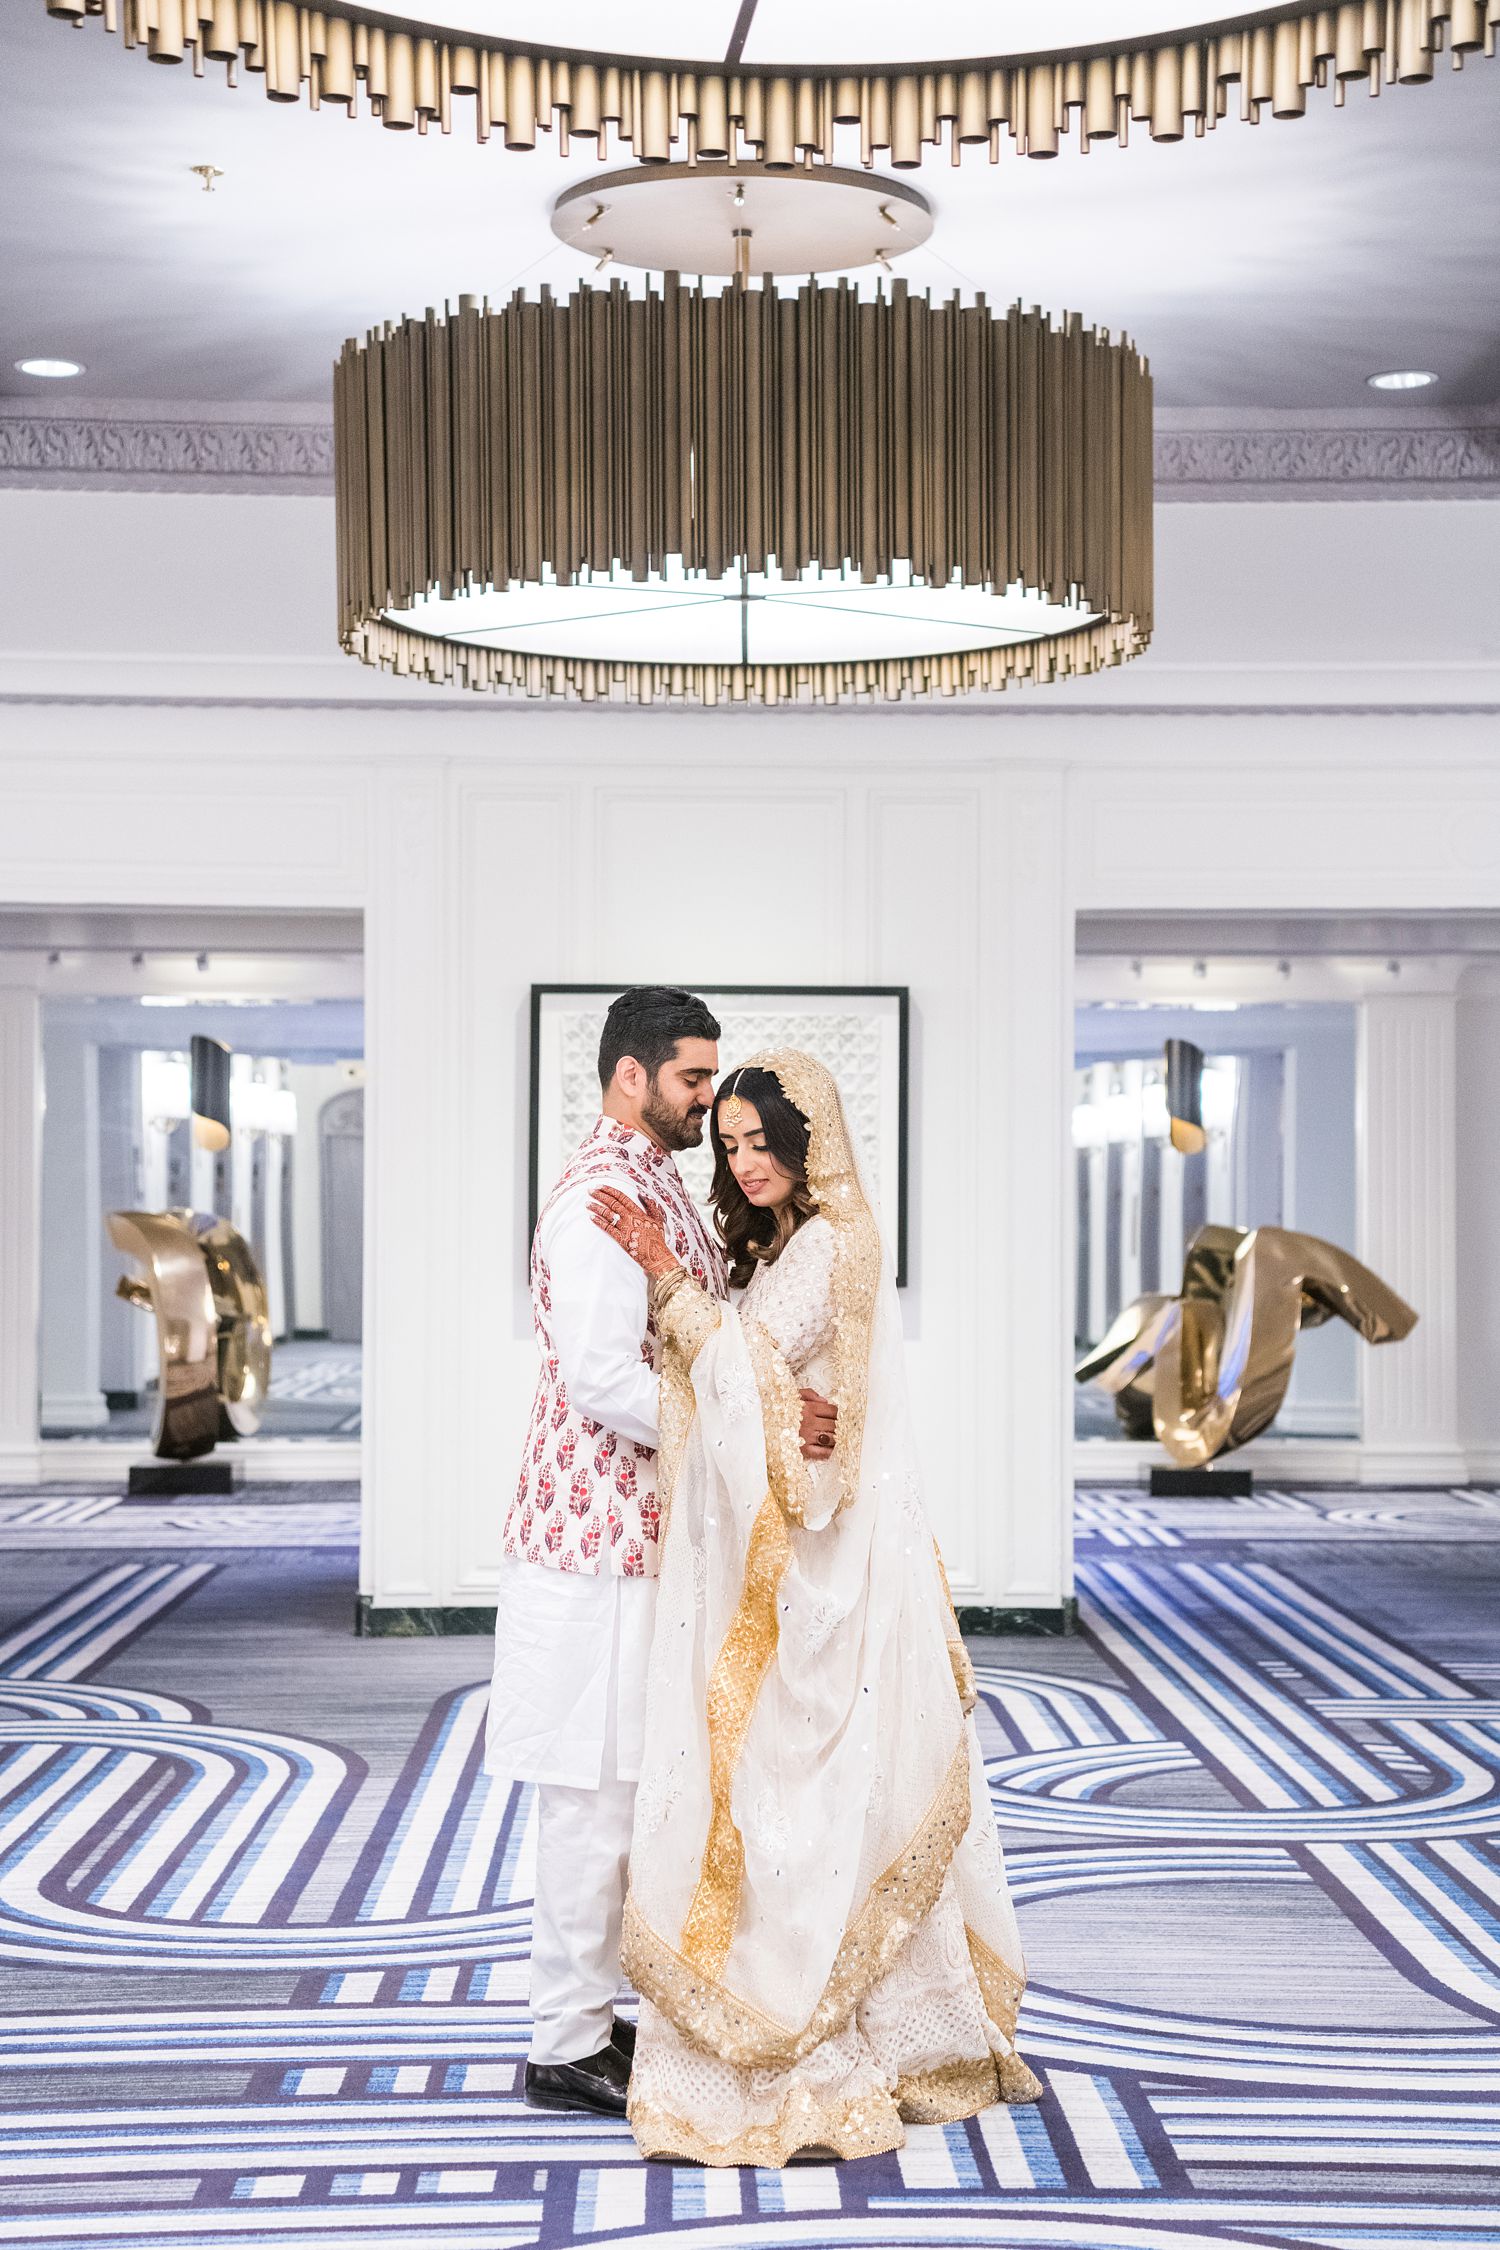 Indian wedding at Hilton Chicago photographed by Maha Studios